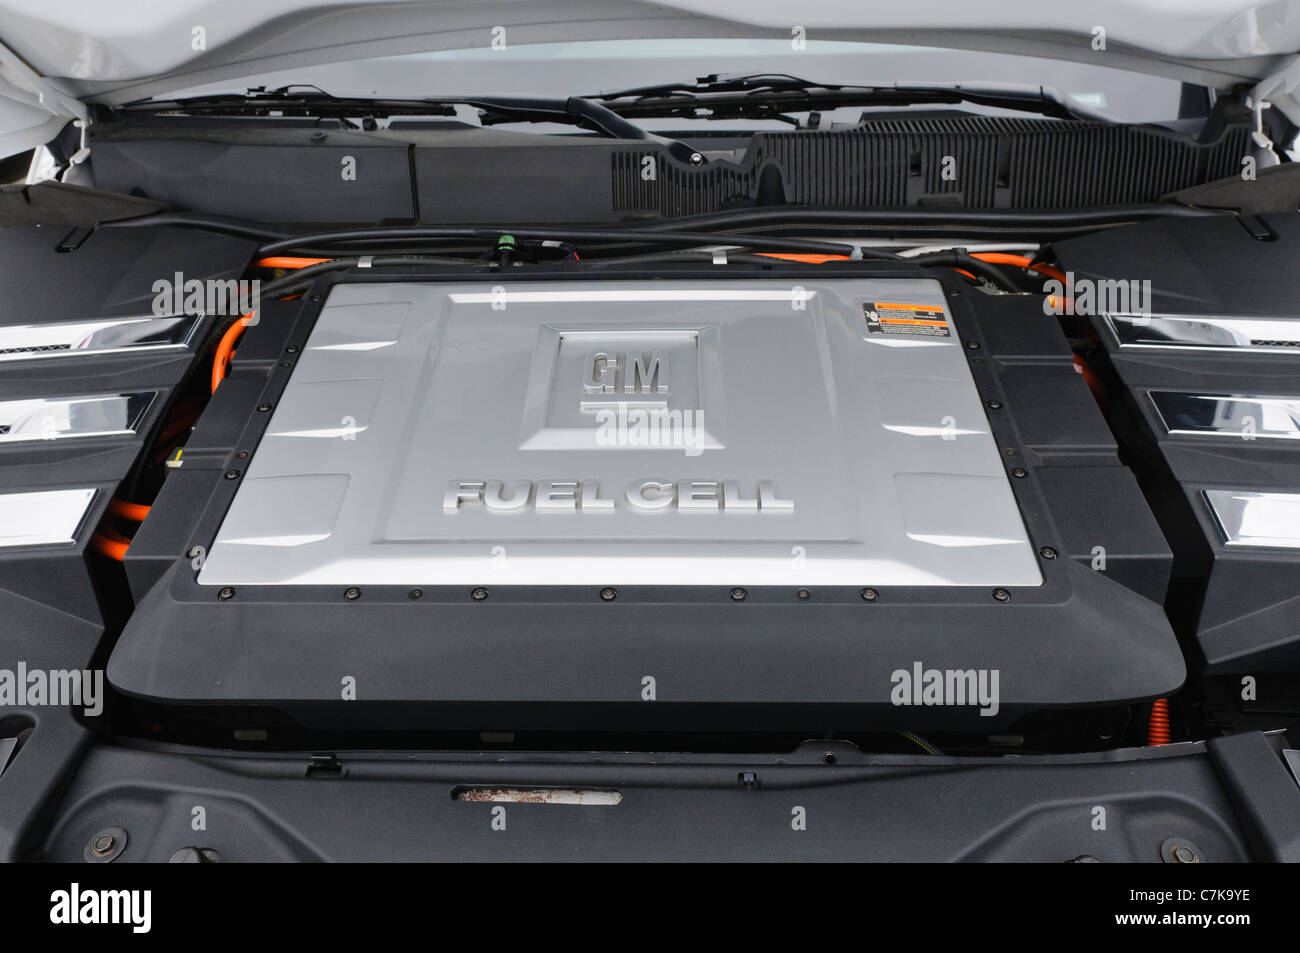 General Motors hydrogen fuel cell in the engine bay of a car Stock Photo